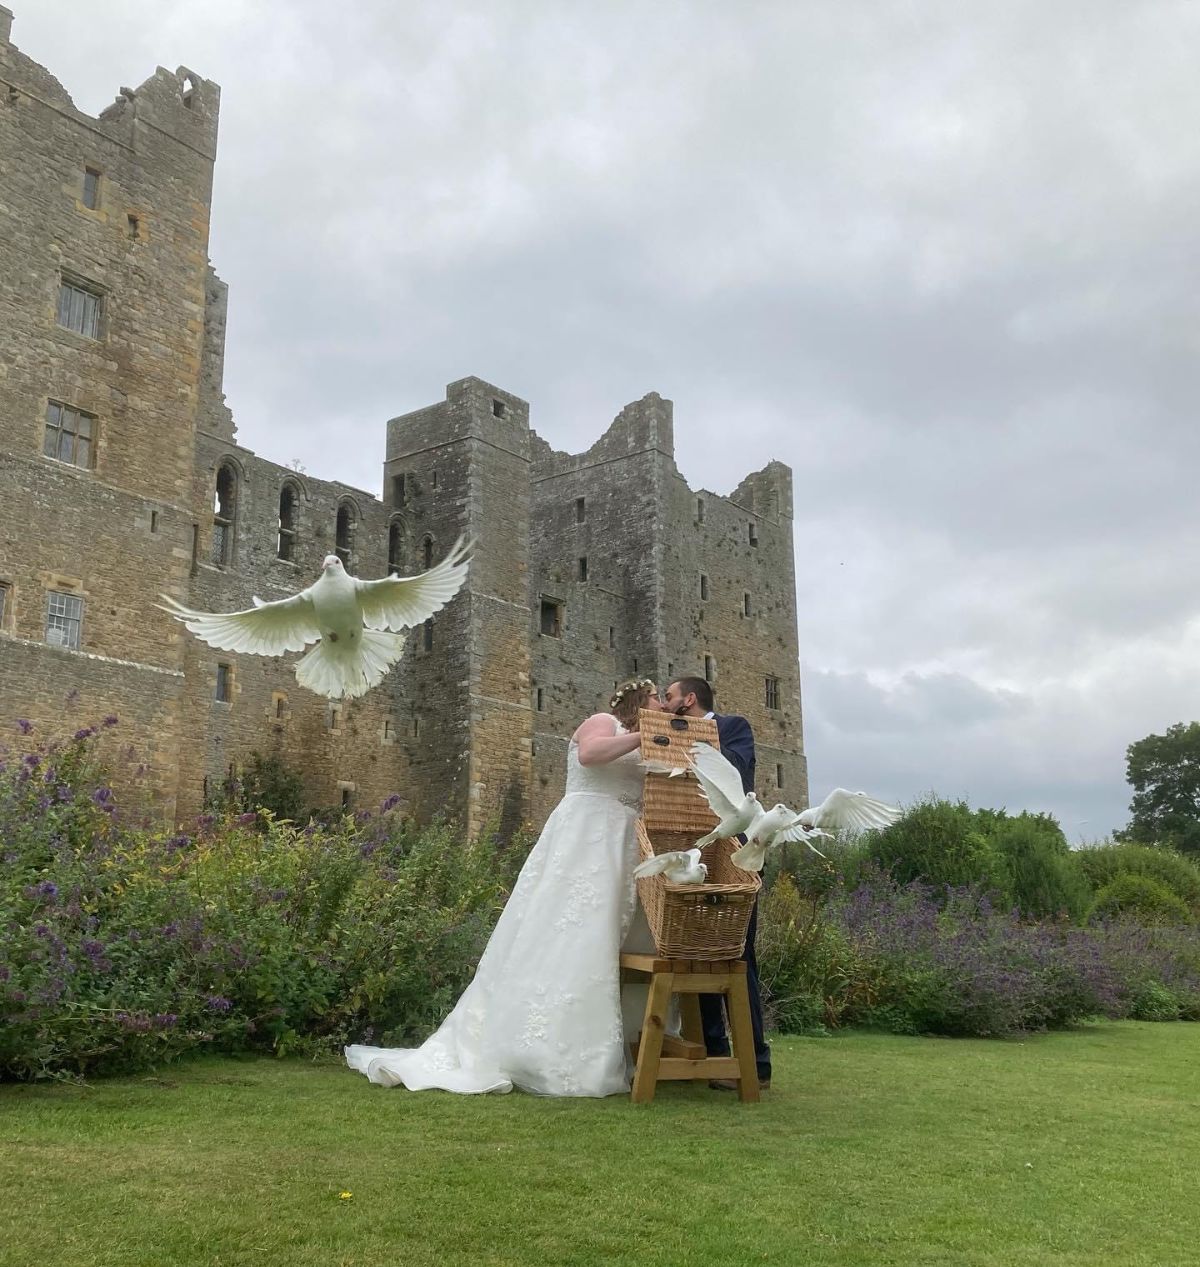 Doves released at Bolton Castle wedding